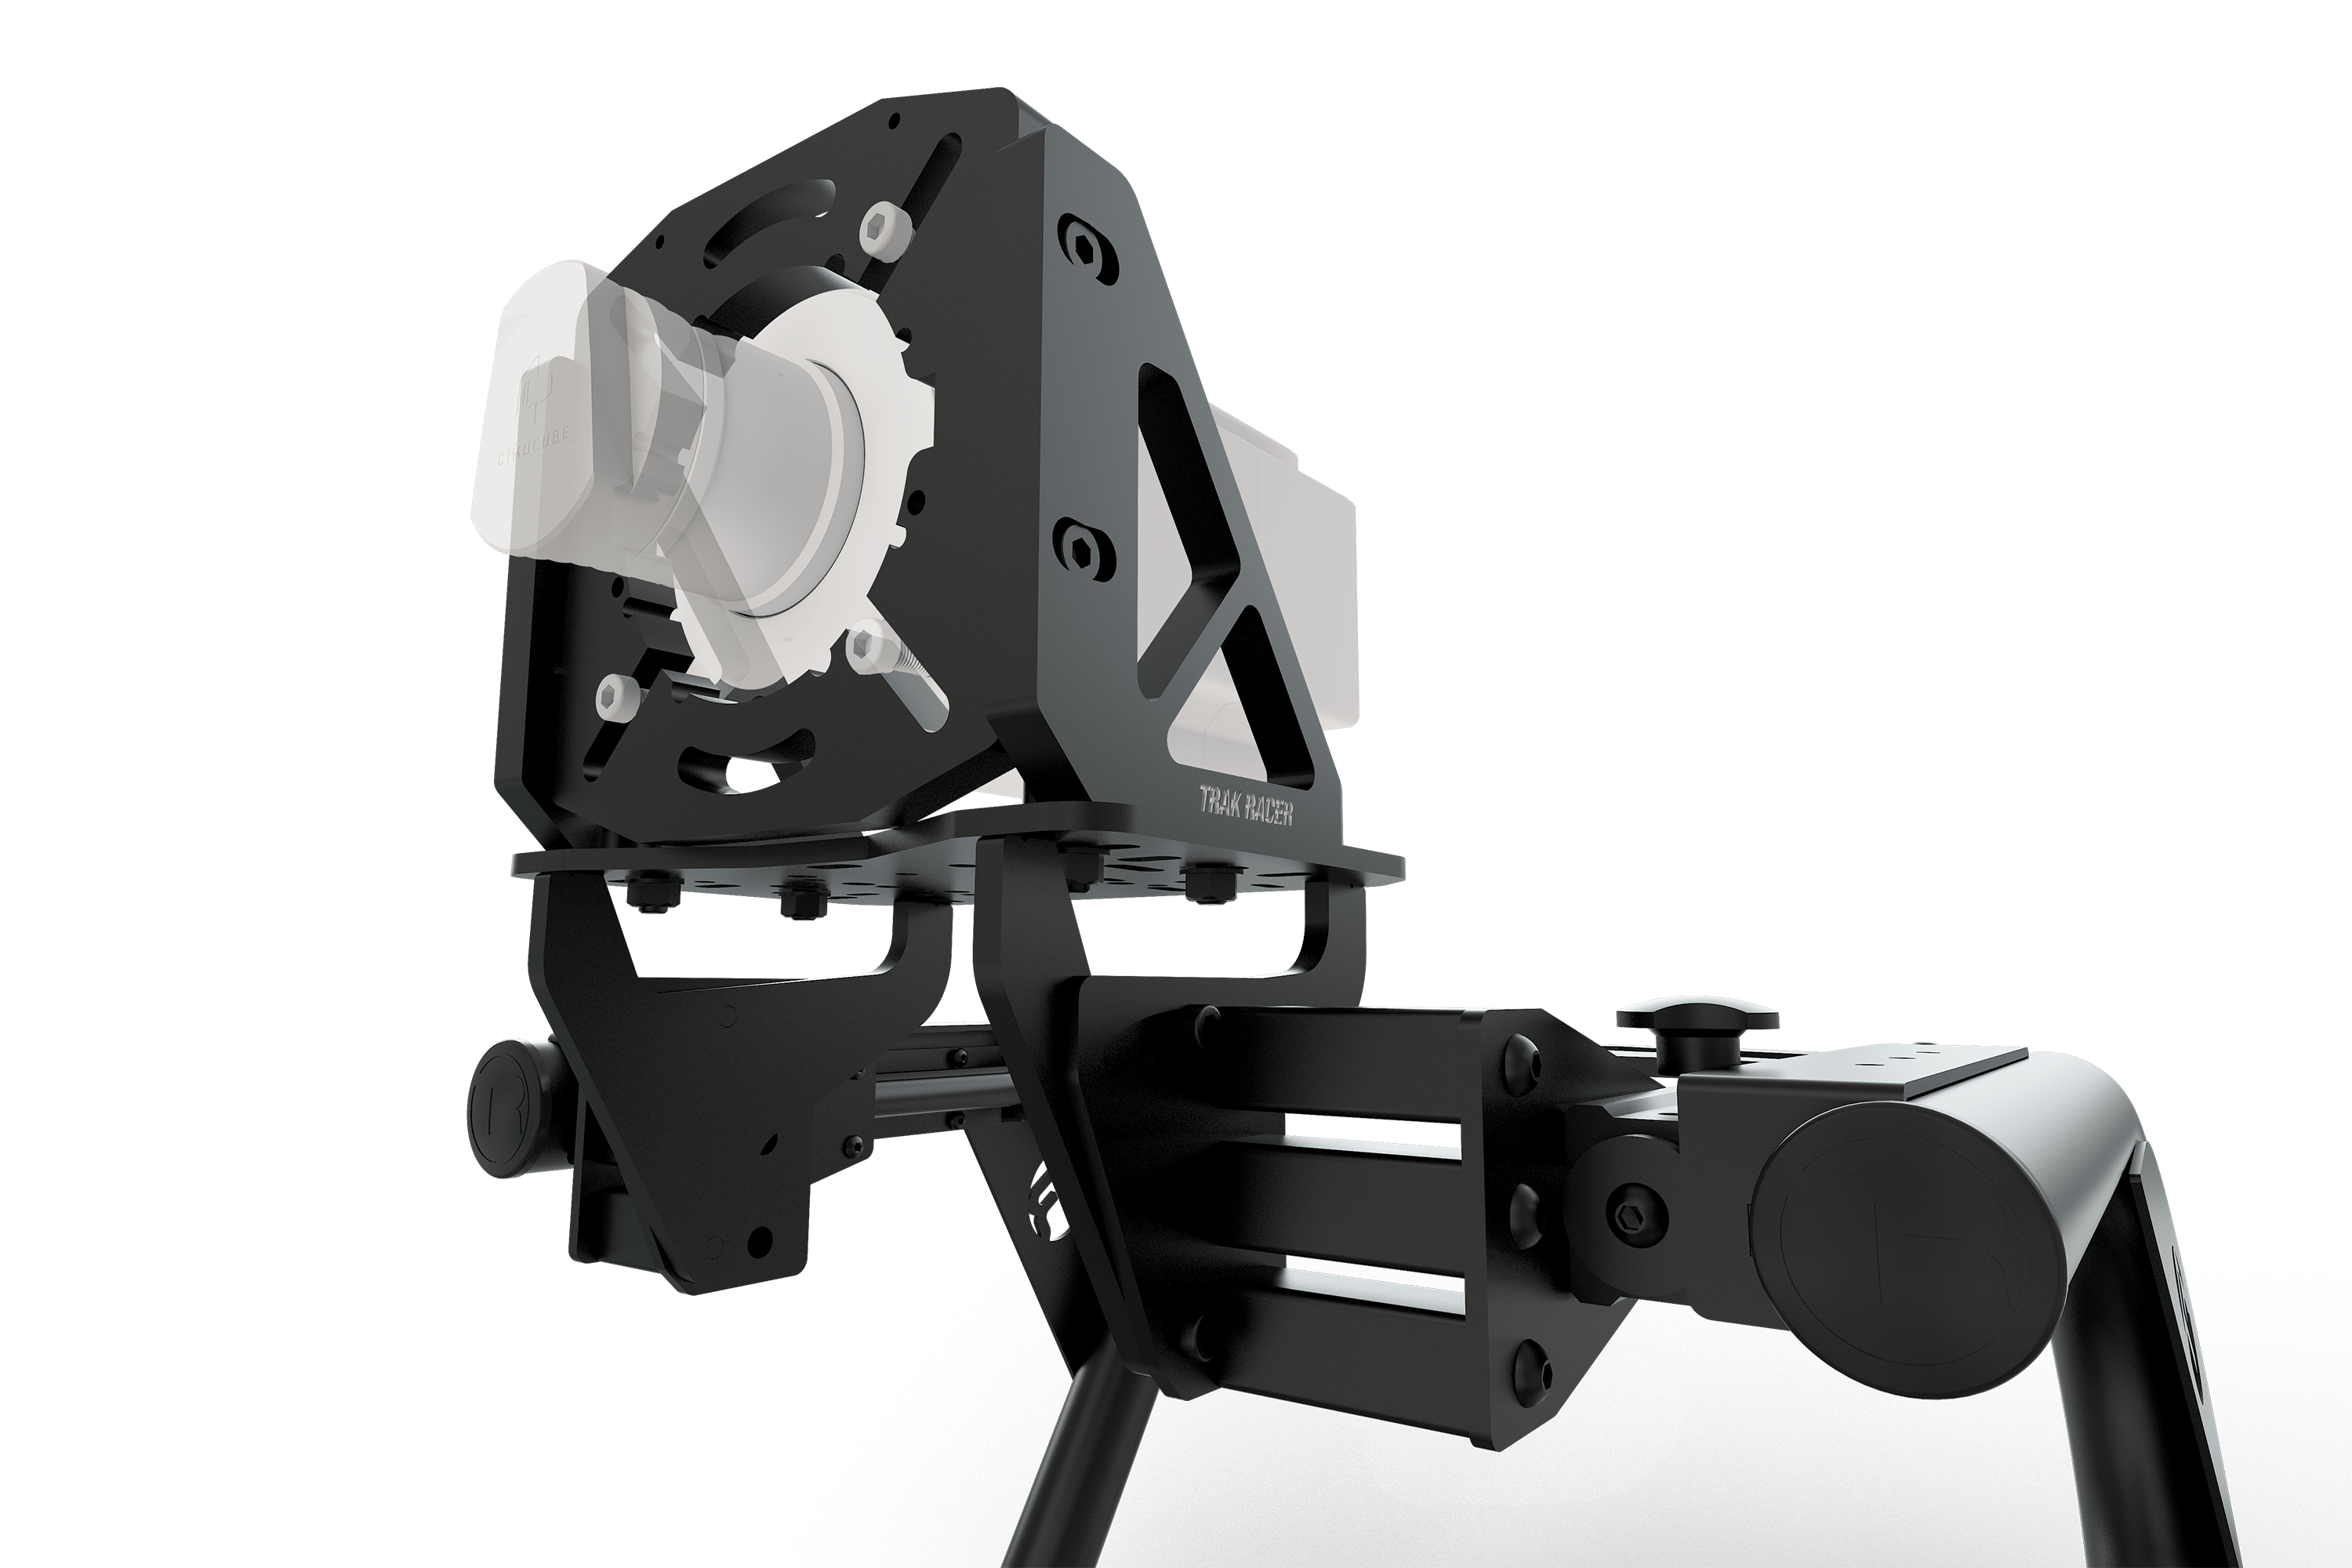 Universal Direct Motor Mount for Simucube, Simucube 2, VRS, Simagic, MIGE, Fanatec and more